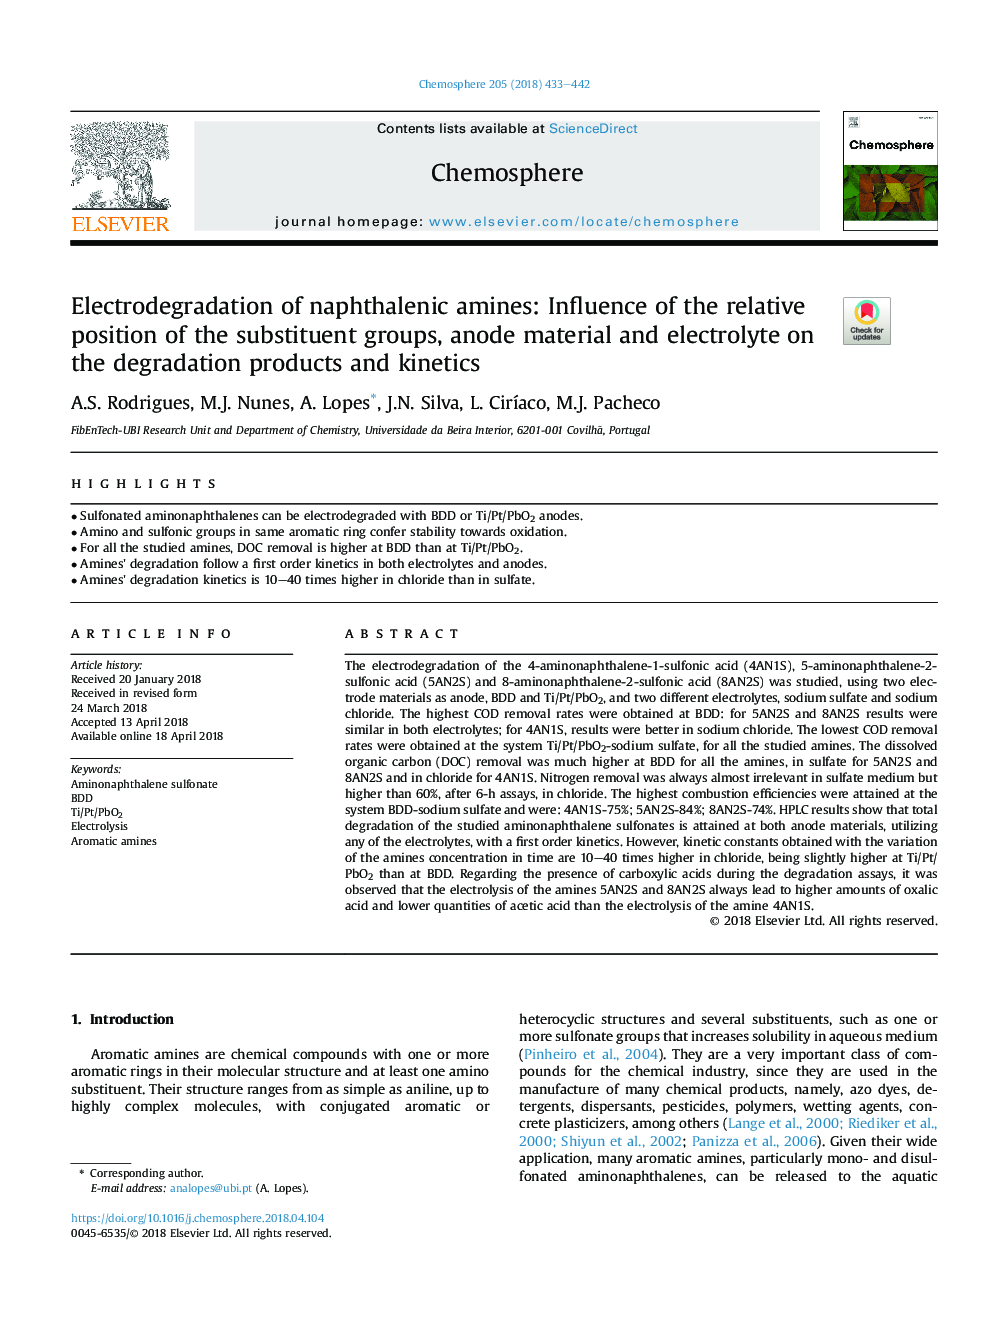 Electrodegradation of naphthalenic amines: Influence of the relative position of the substituent groups, anode material and electrolyte on the degradation products and kinetics